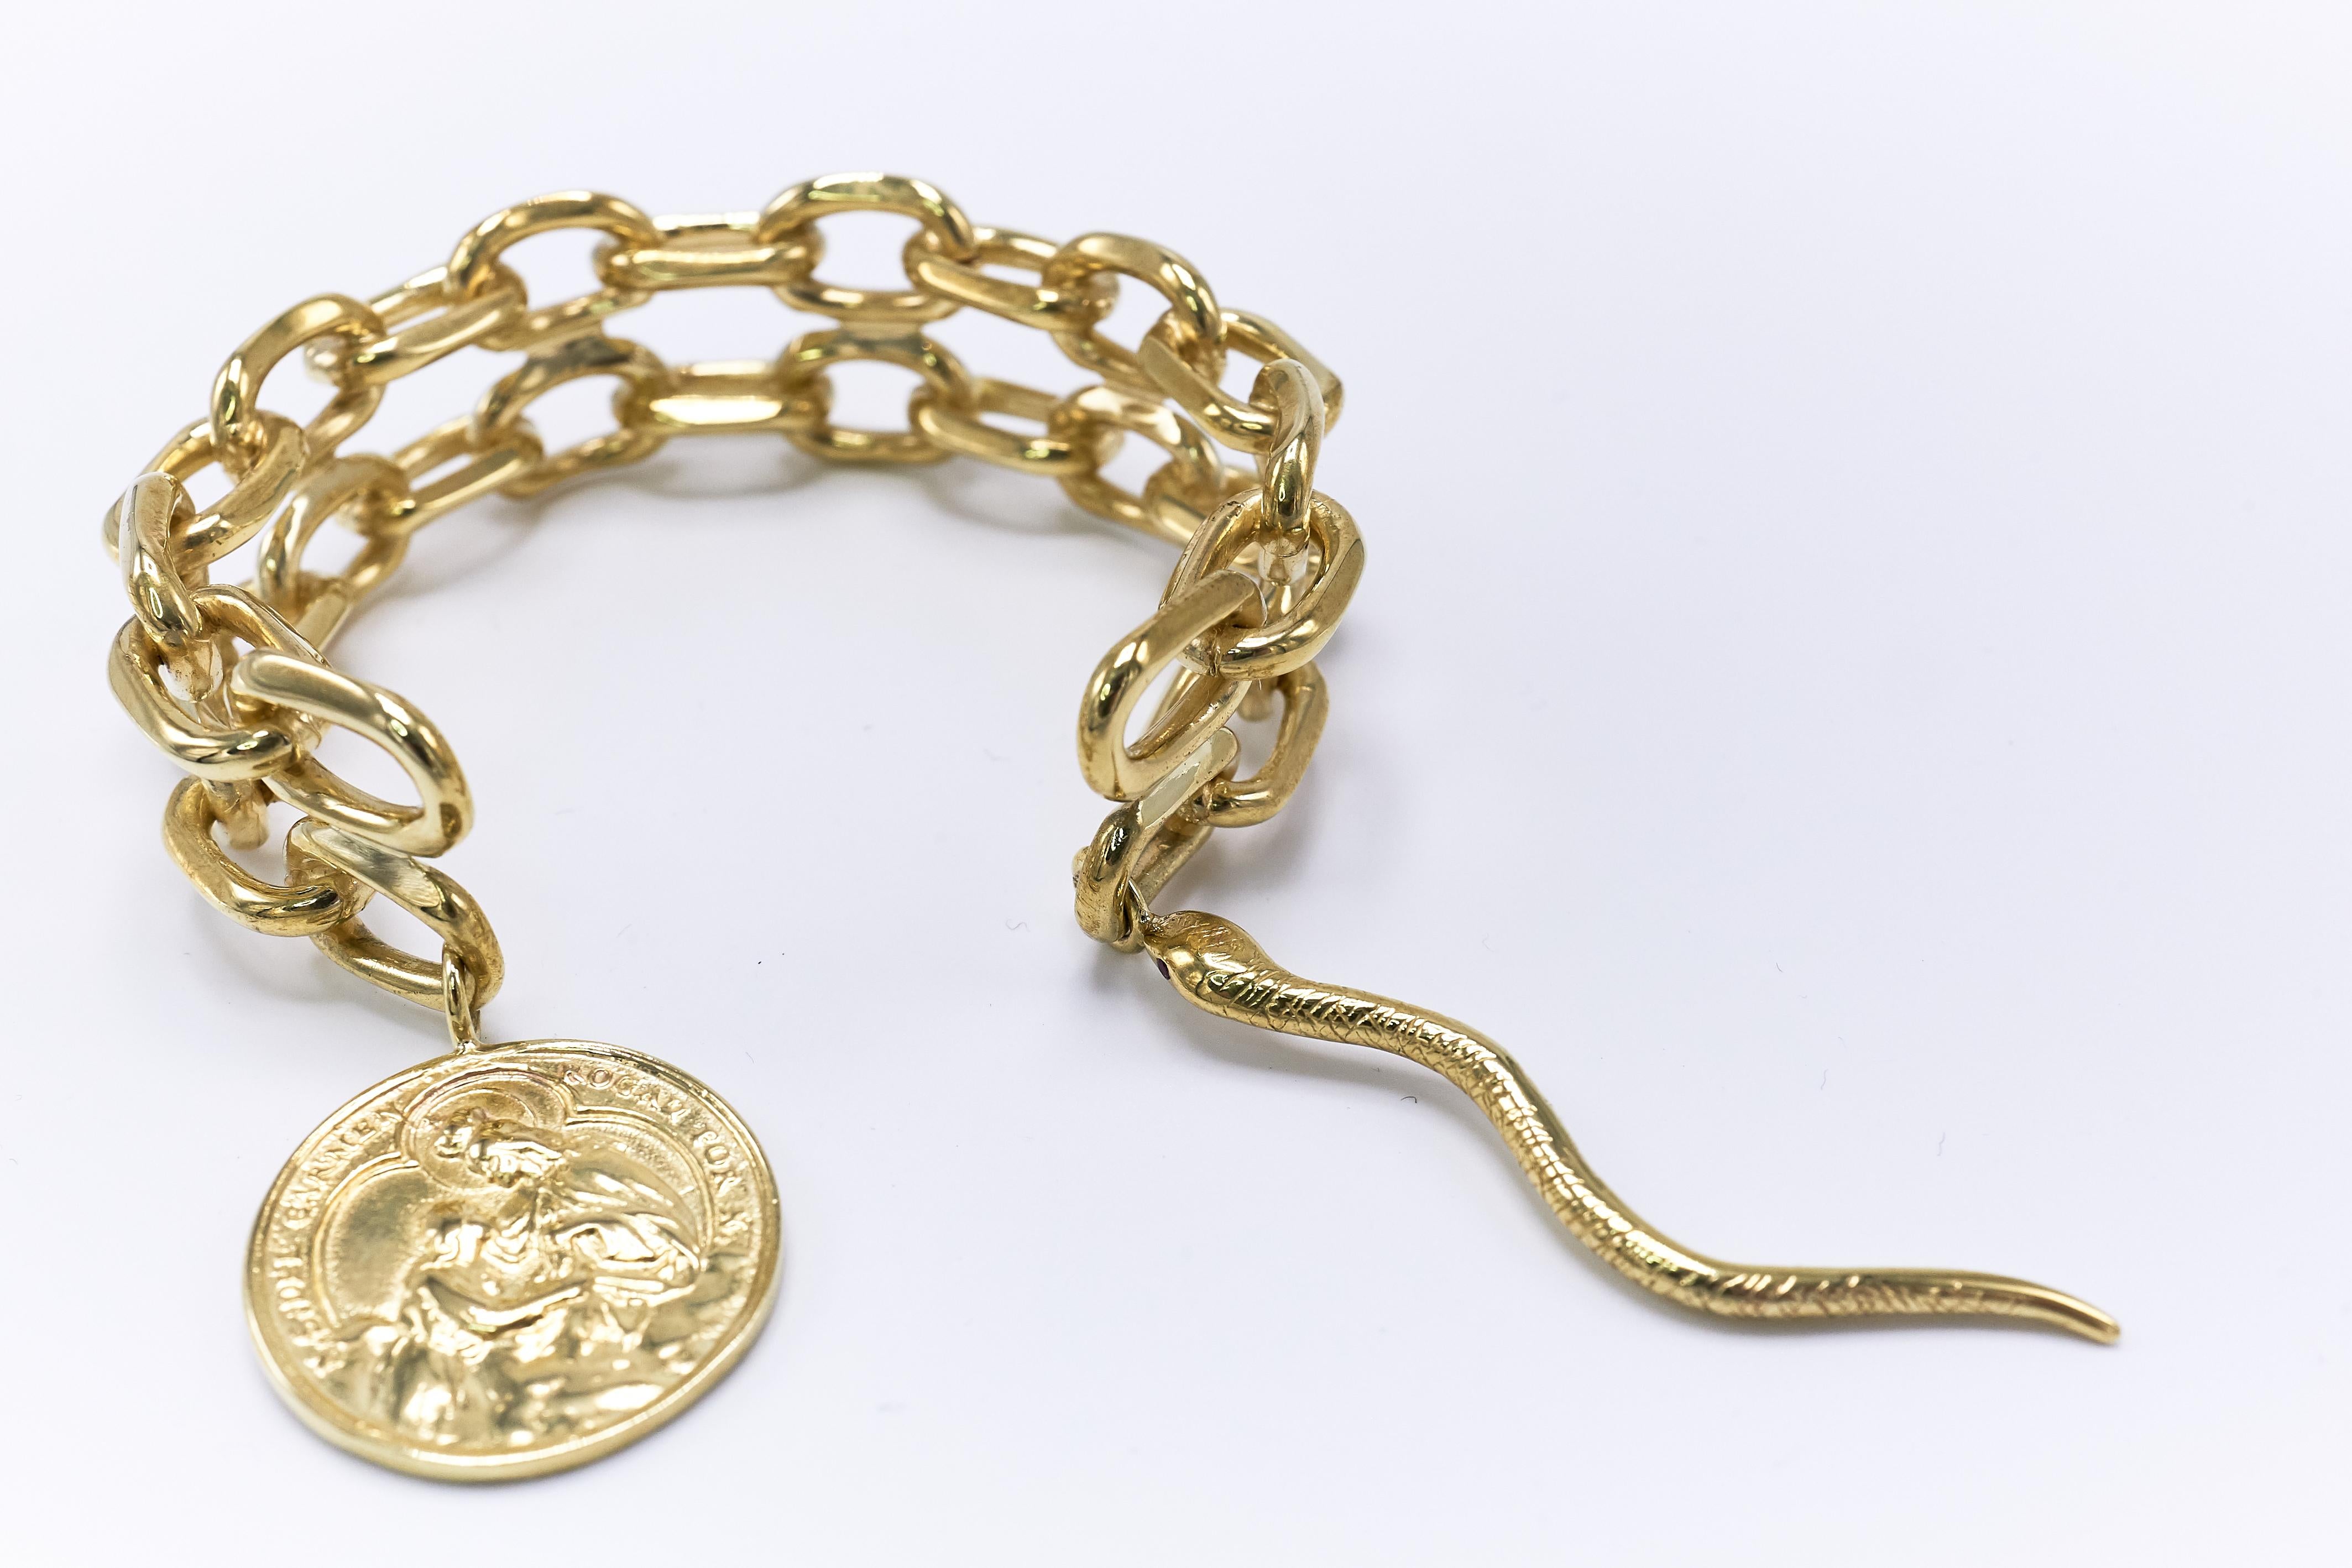 Statement Chain Cuff Bangle Bracelet Medal Bronze J Dauphin In New Condition For Sale In Los Angeles, CA